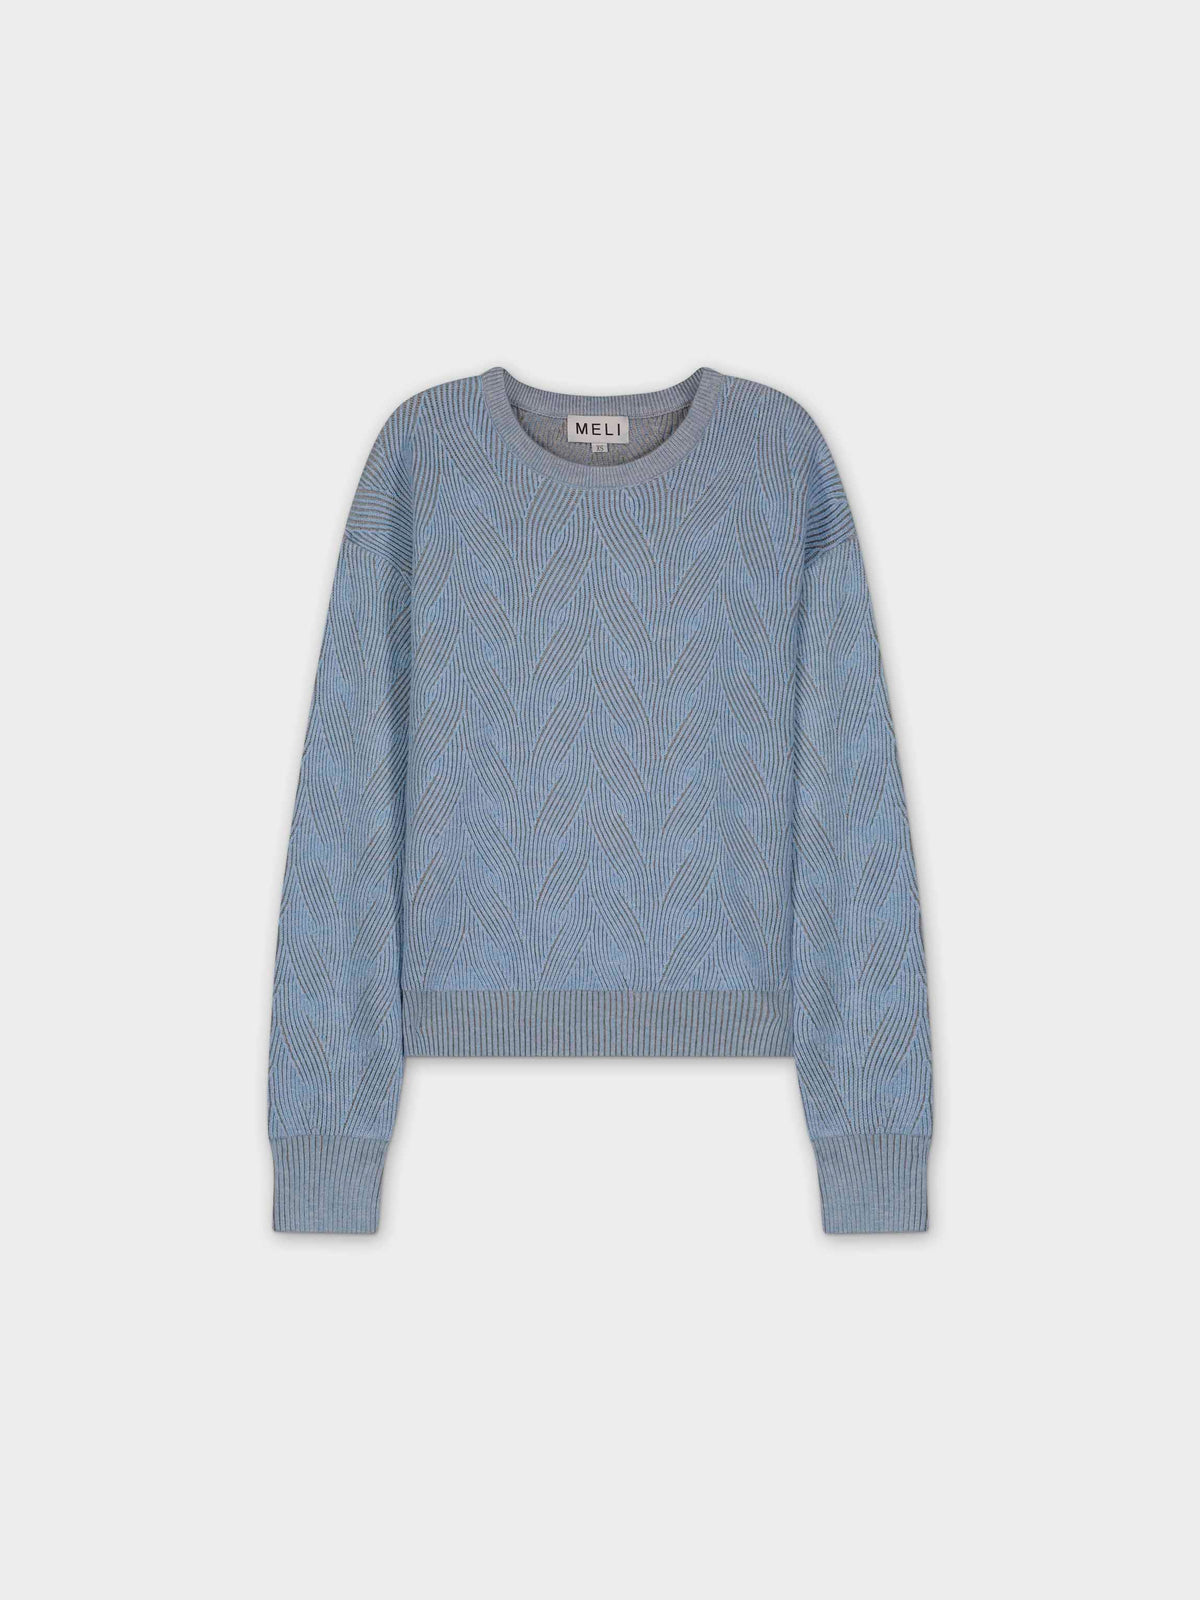 TWO TONE WAVE SWEATER-LIGHT BLUE/GREY